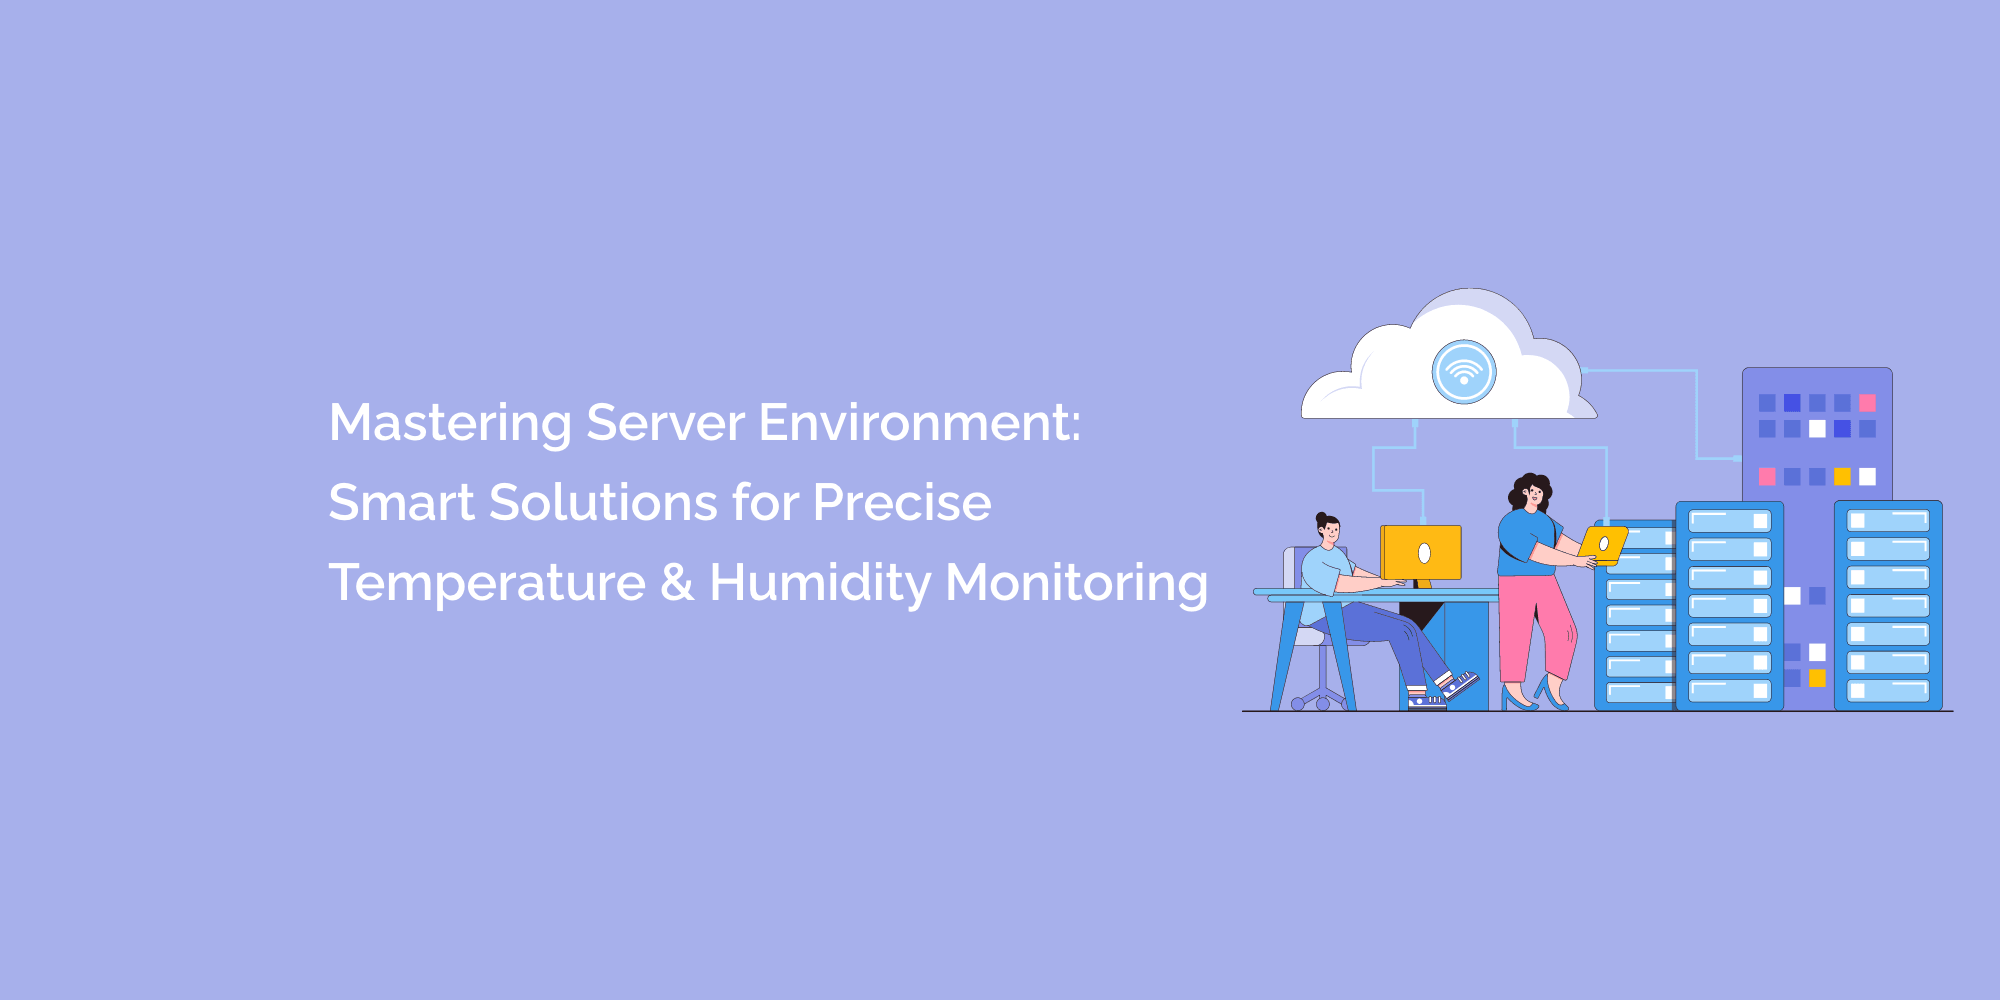 Mastering Server Environment: Smart Solutions for Precise Temperature and Humidity Monitoring